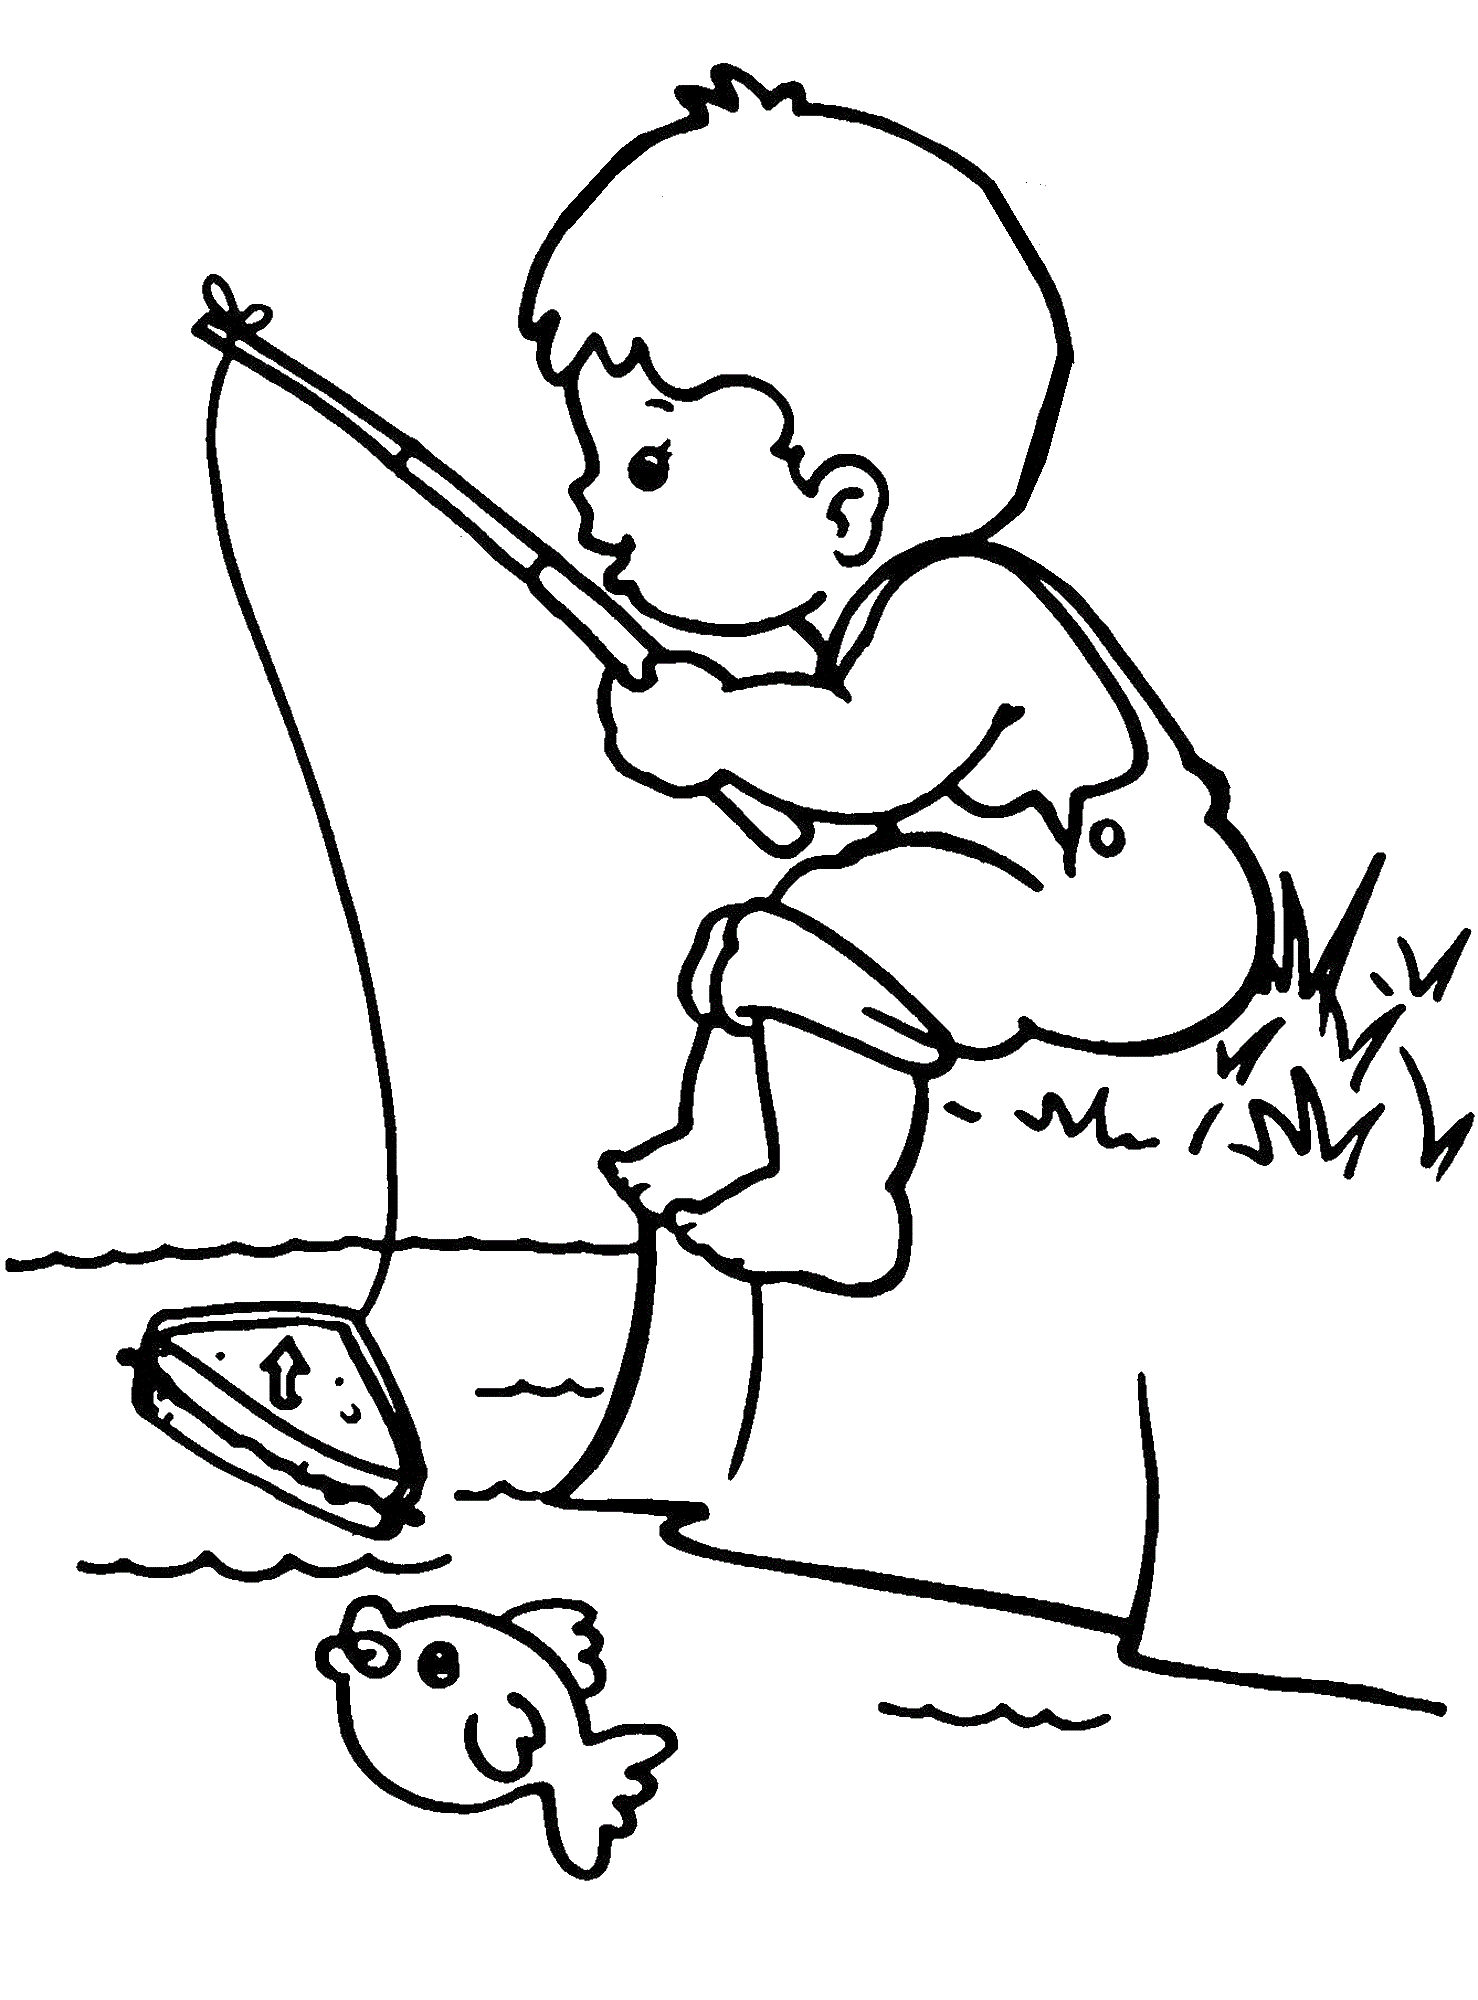 Fishing coloring pages.